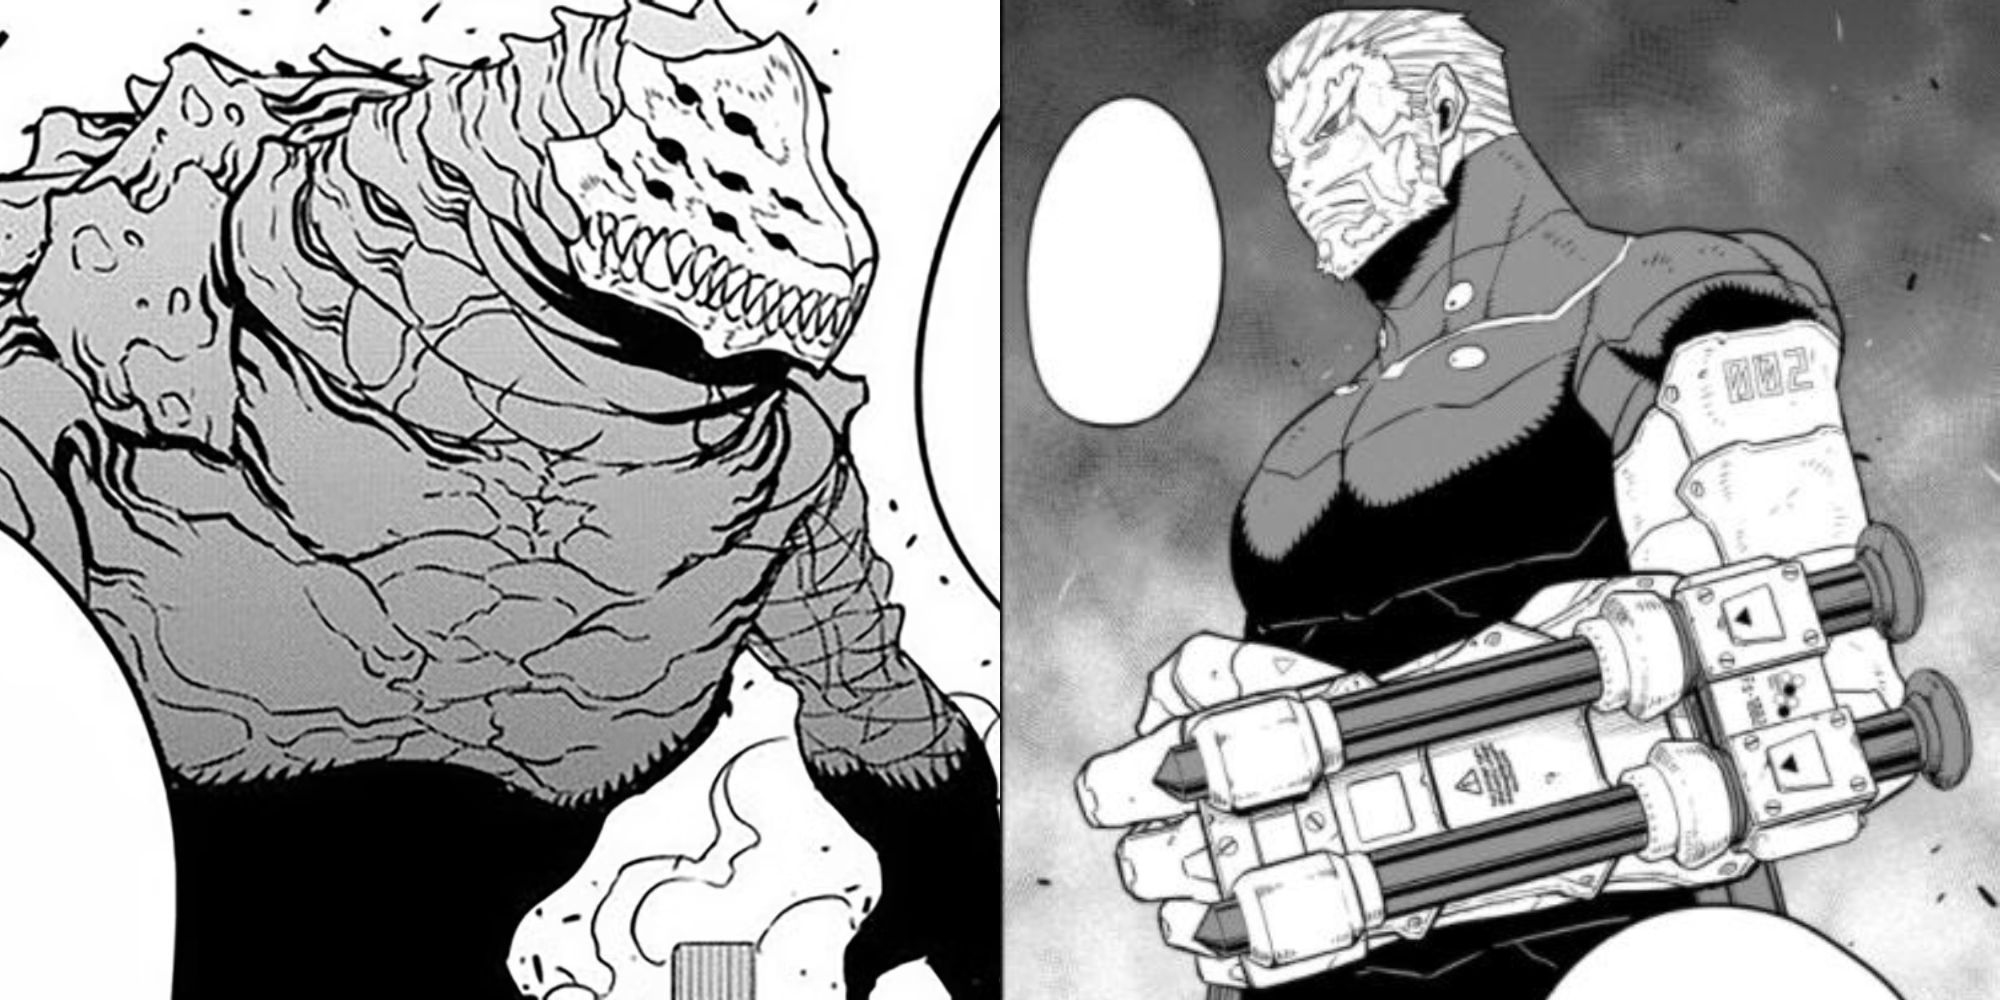 Kaiju No. 2's true appearance, and Isao using Numbers Weapon 2.